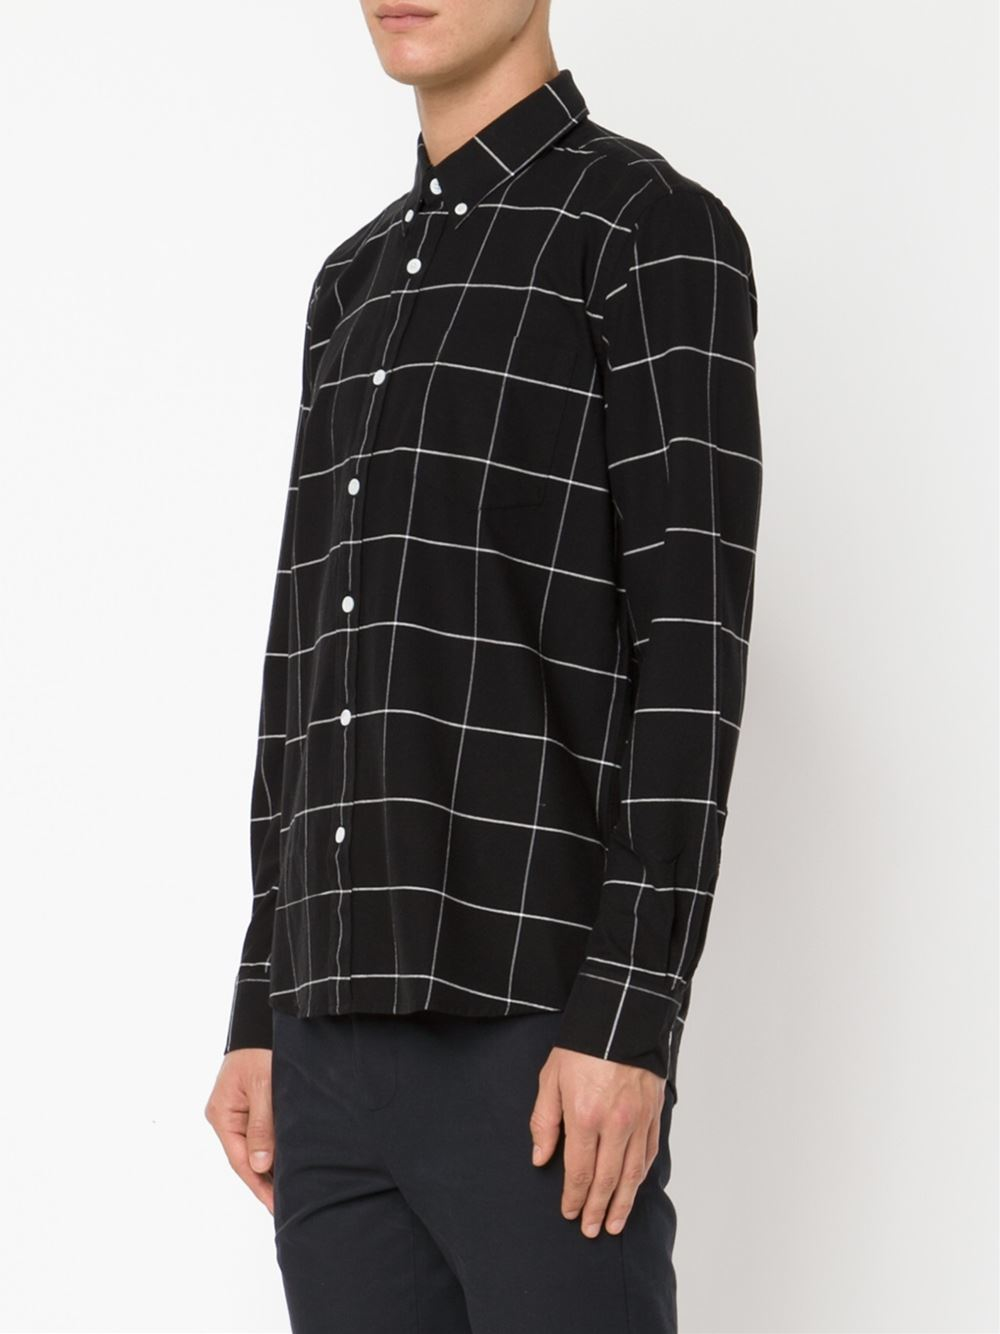 Saturdays NYC Woven Grid Shirt in Black for Men - Lyst